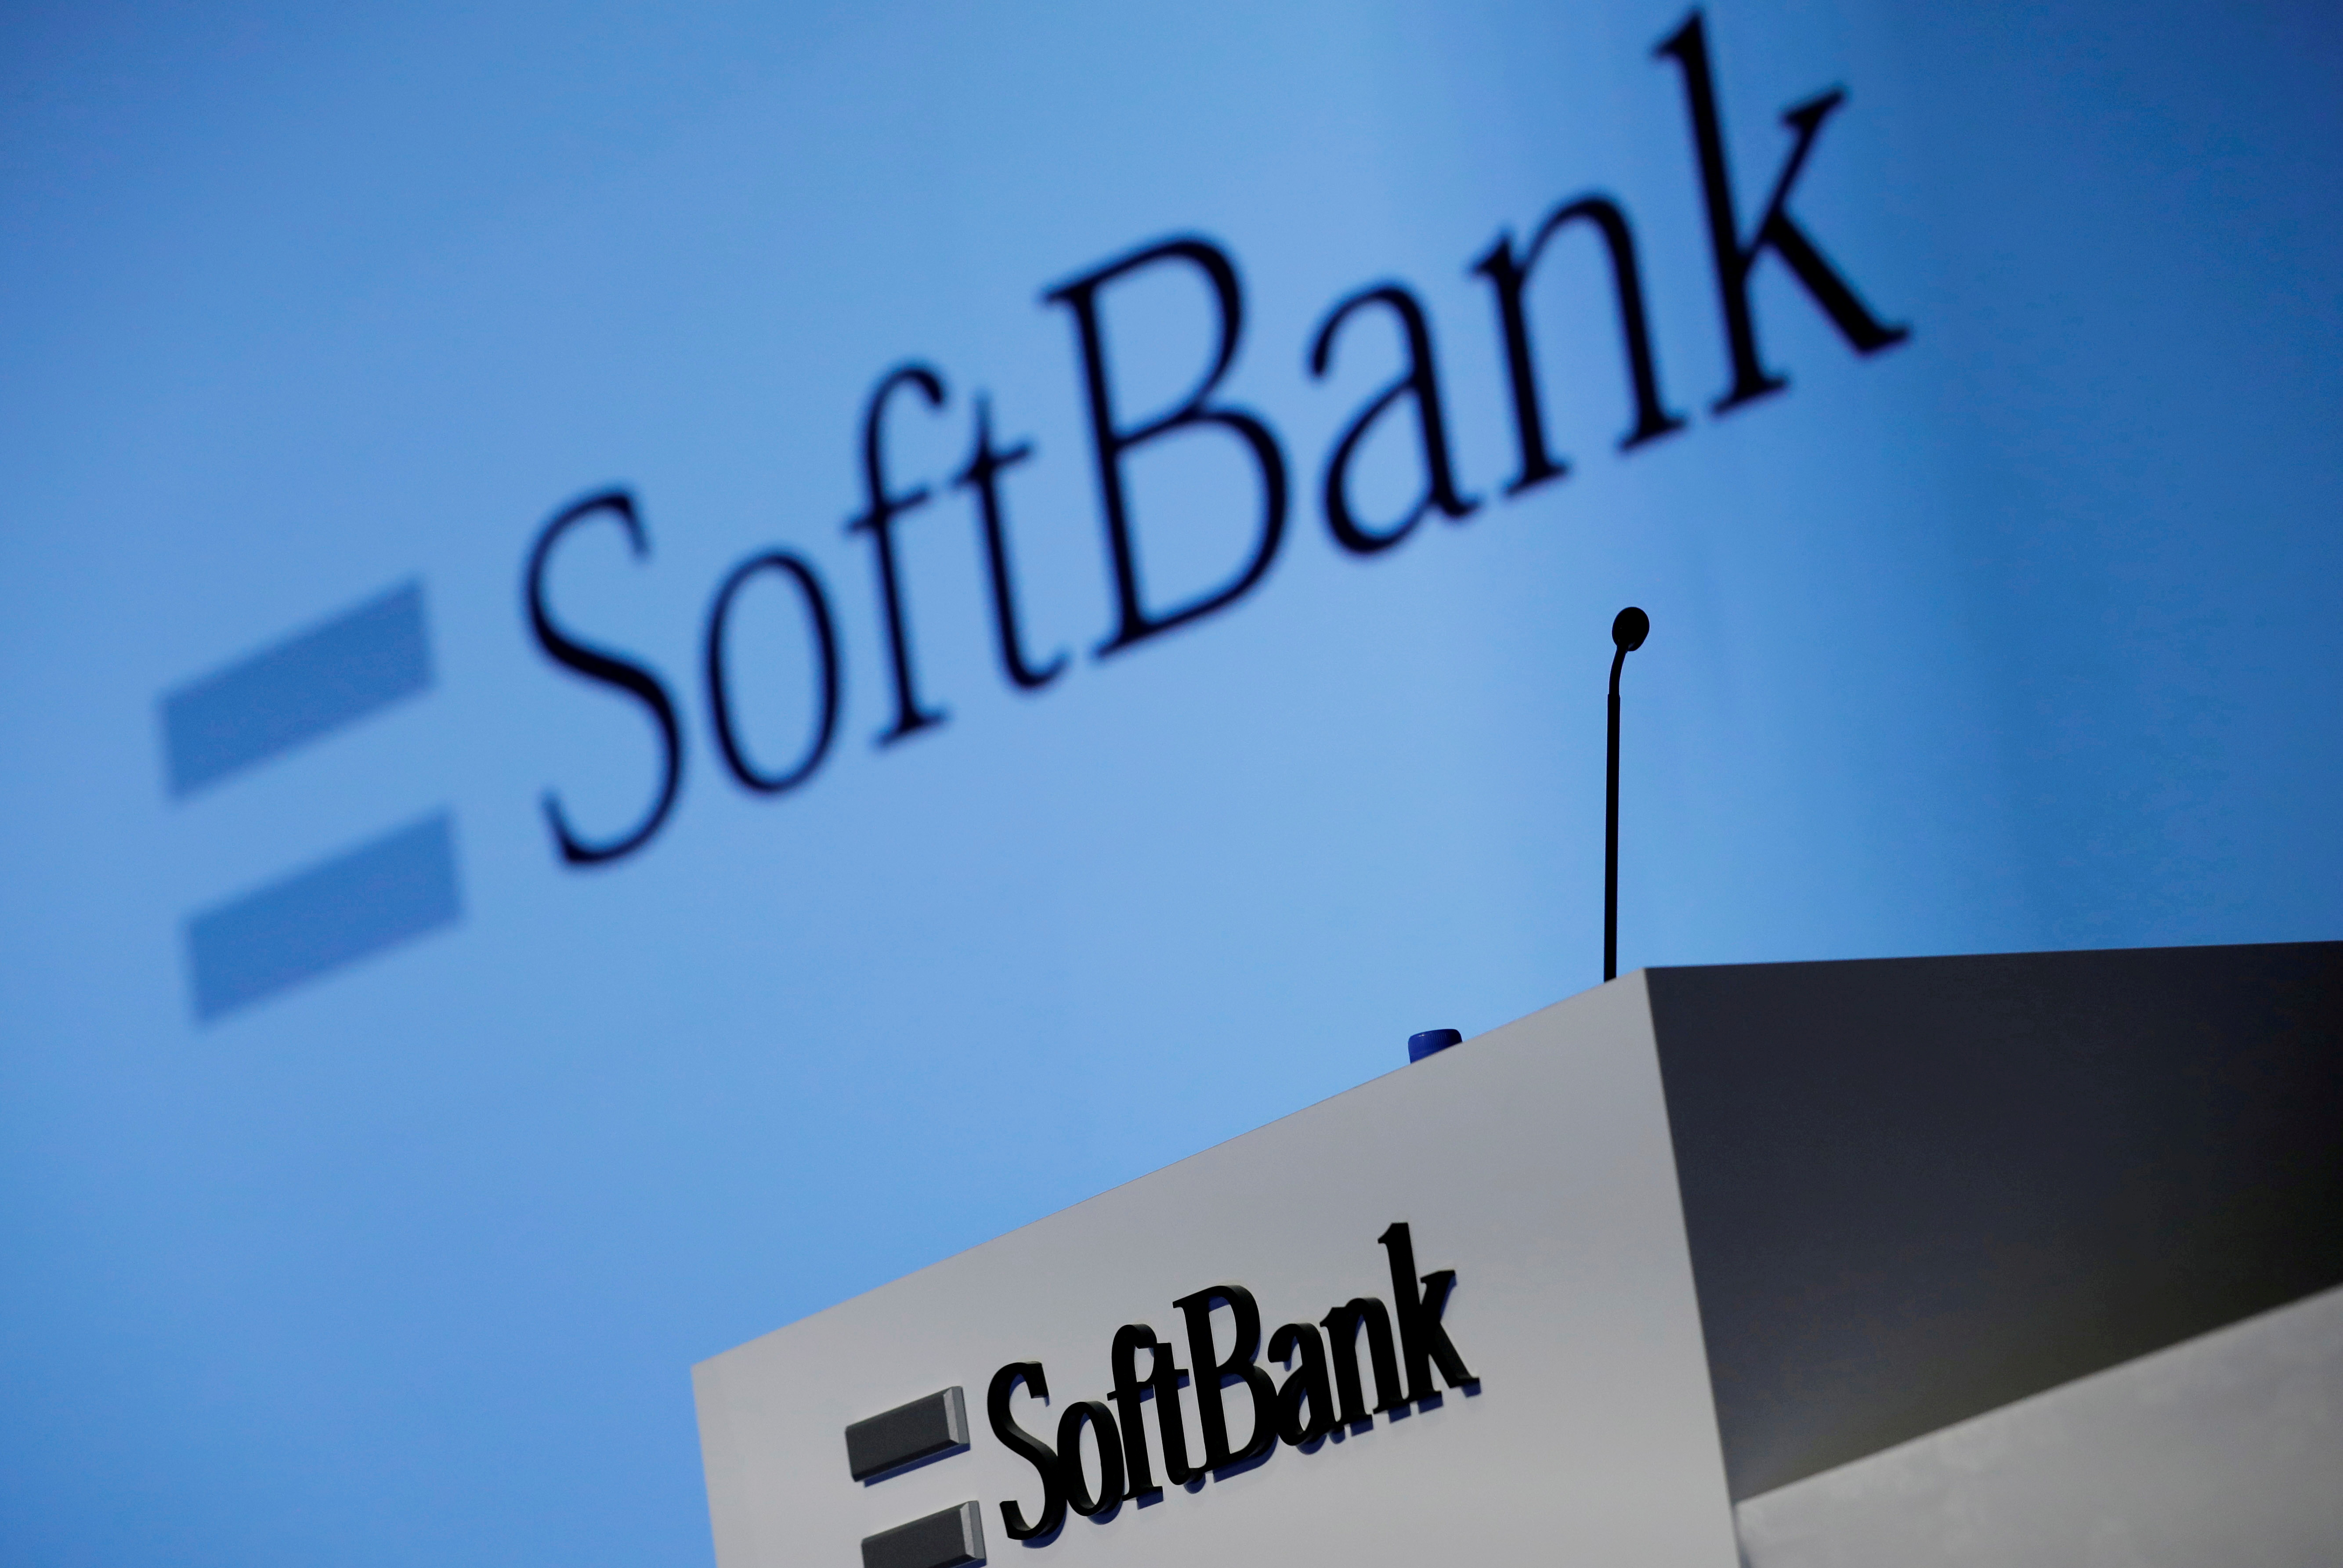 SoftBank Corp's logo is pictured at a news conference in Tokyo, Japan, February 4, 2021. REUTERS/Kim Kyung-Hoon